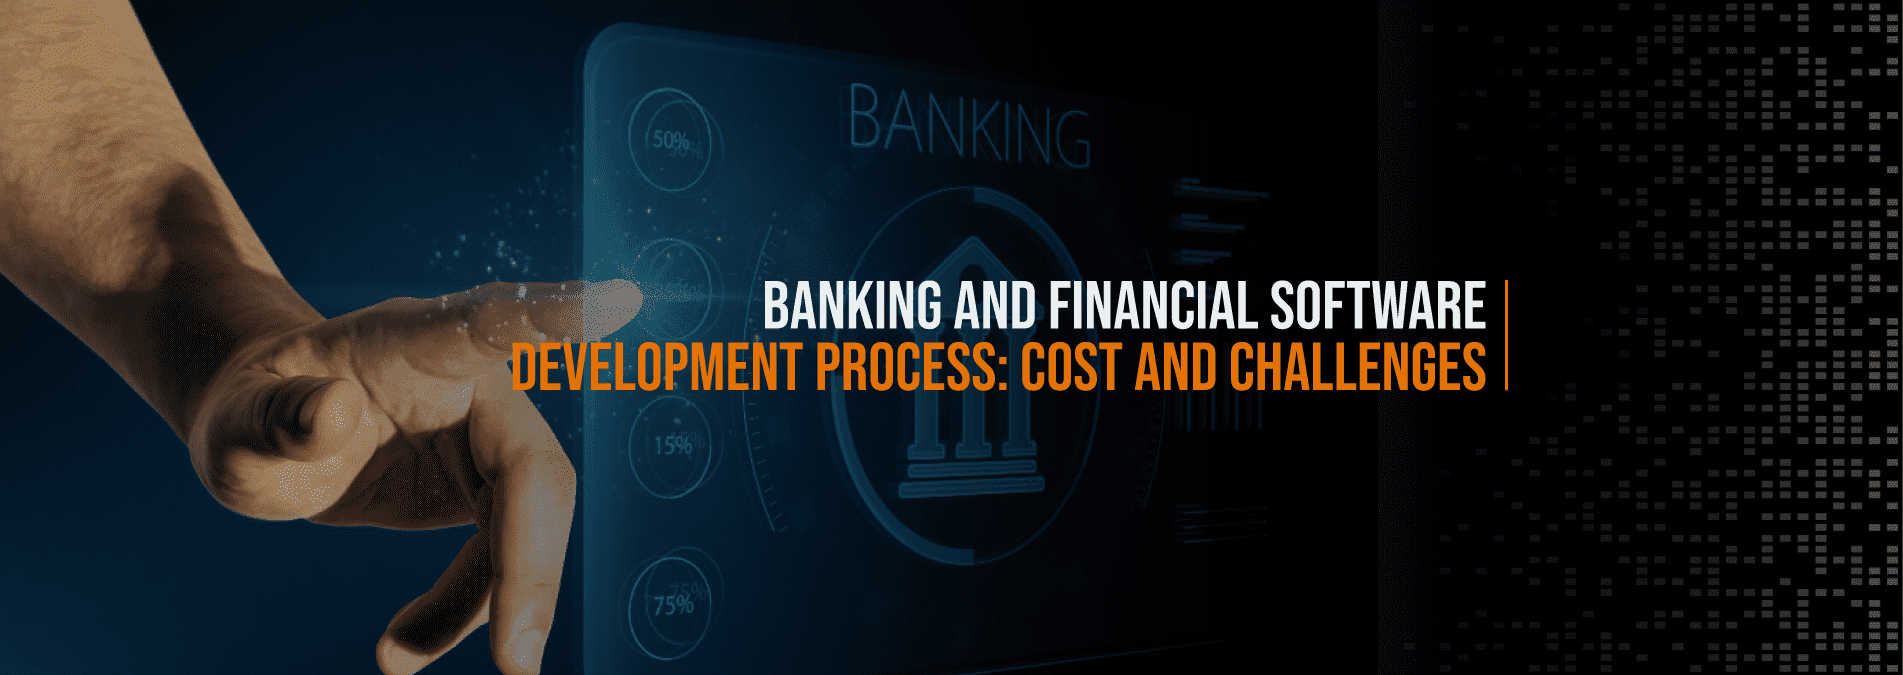 Banking-and-Financial-Software-Development-Process-Cost-and-Challenges Internet Soft